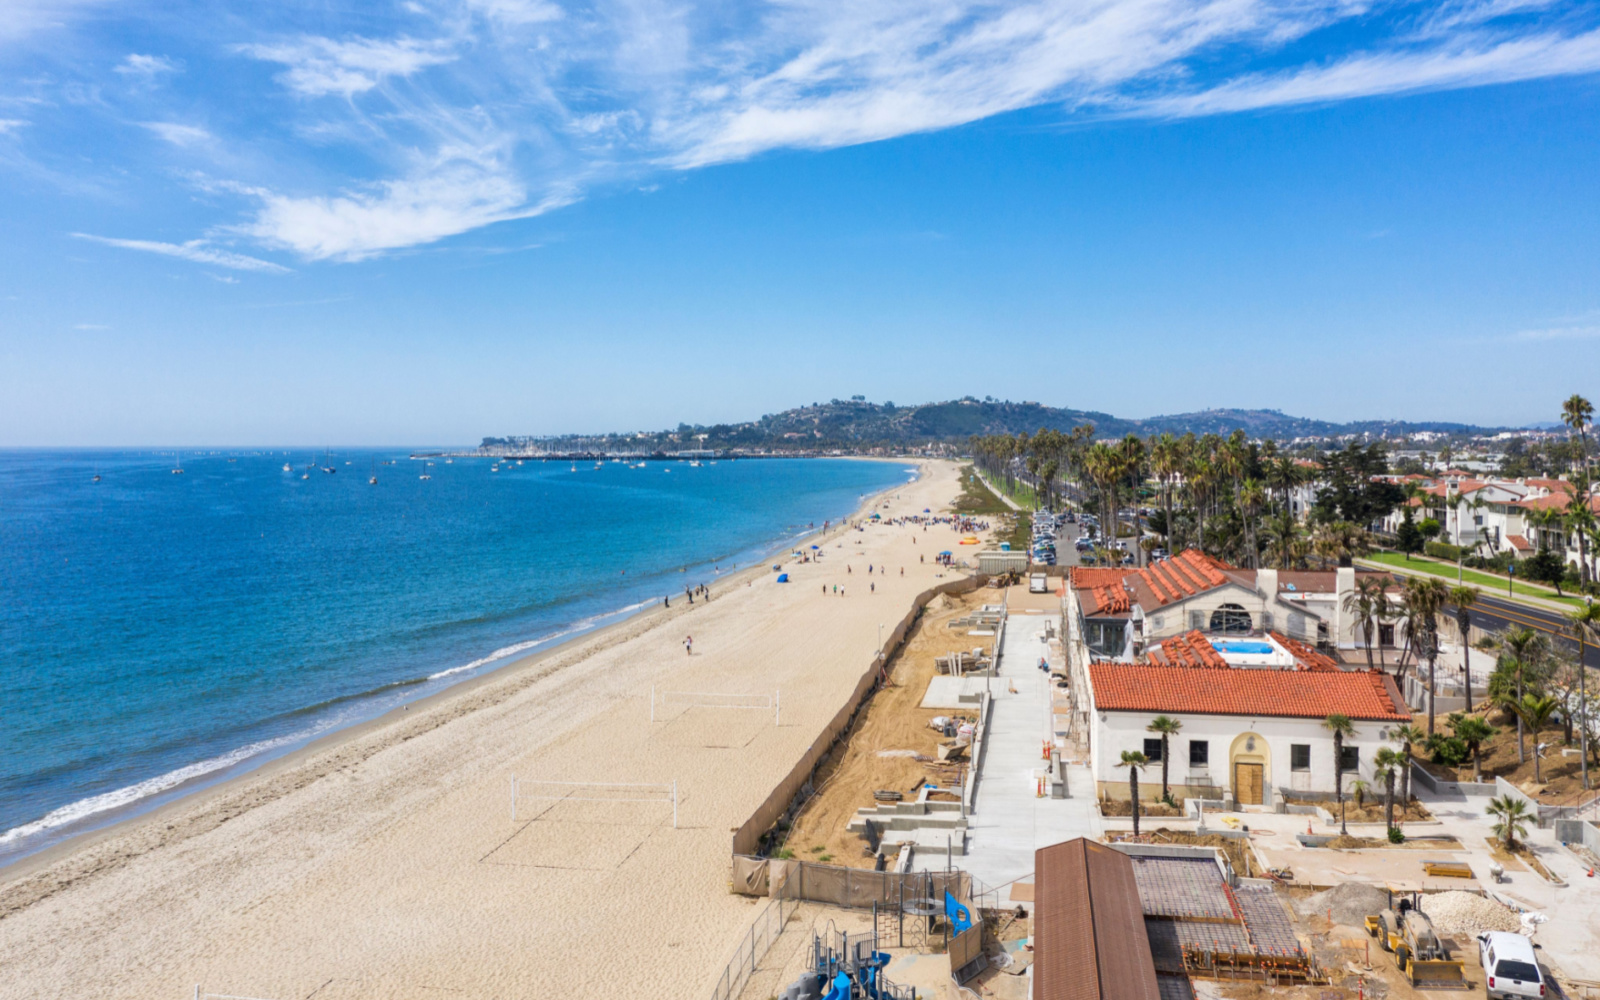 Where to Stay in Santa Barbara | Best Areas & Hotels